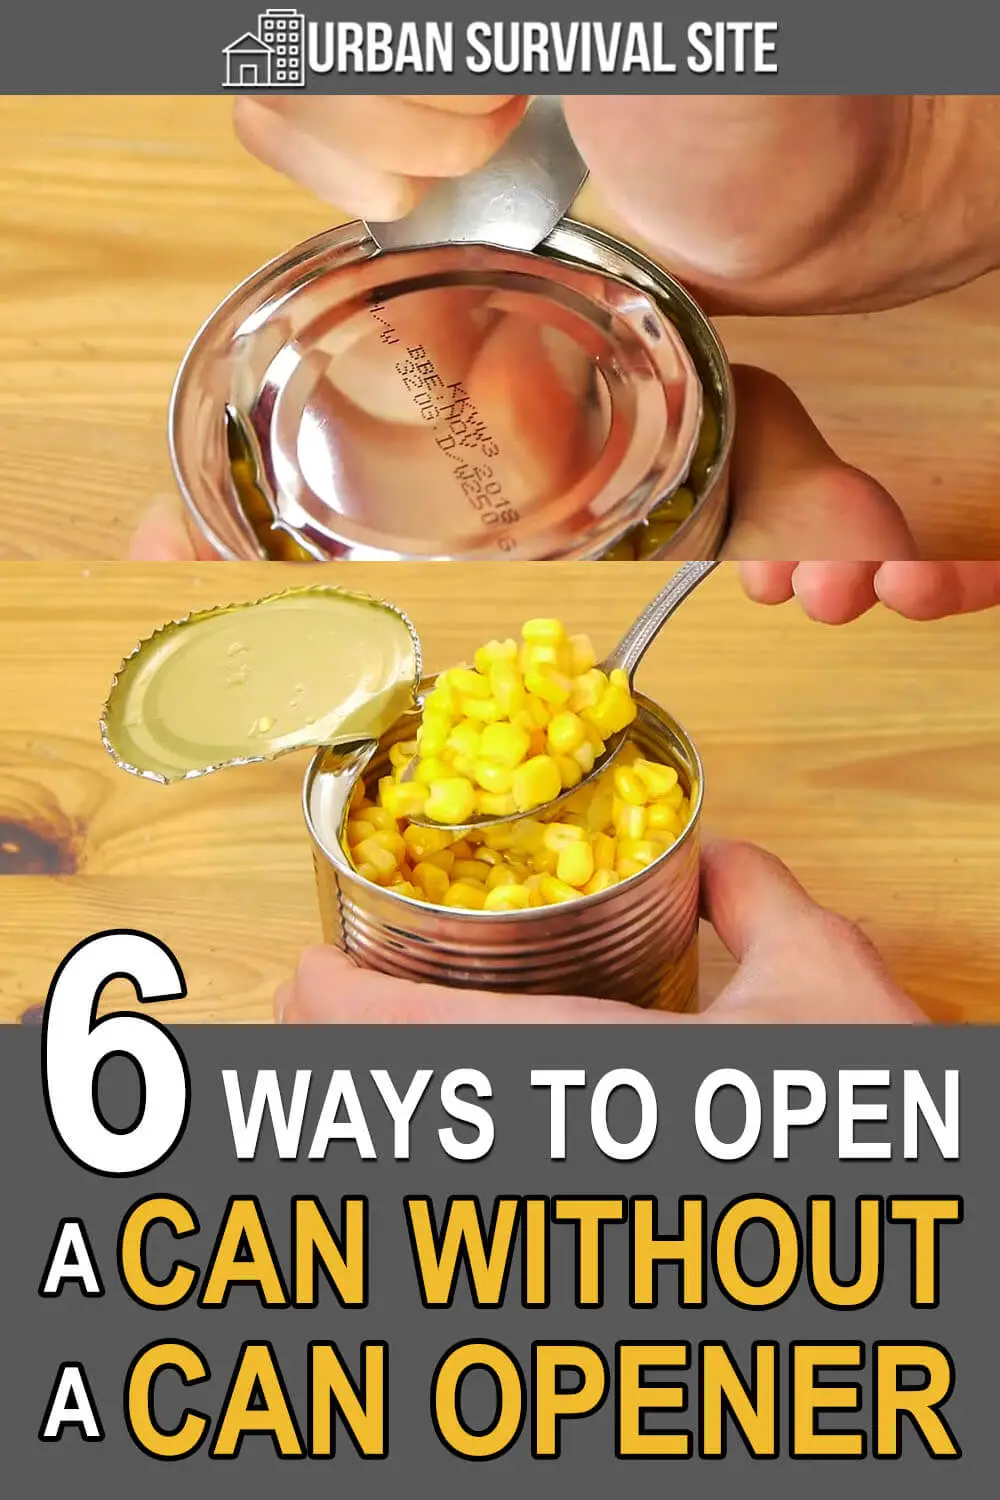 Store Bought Canned Foods-Opening w/out a can opener Ngcb1